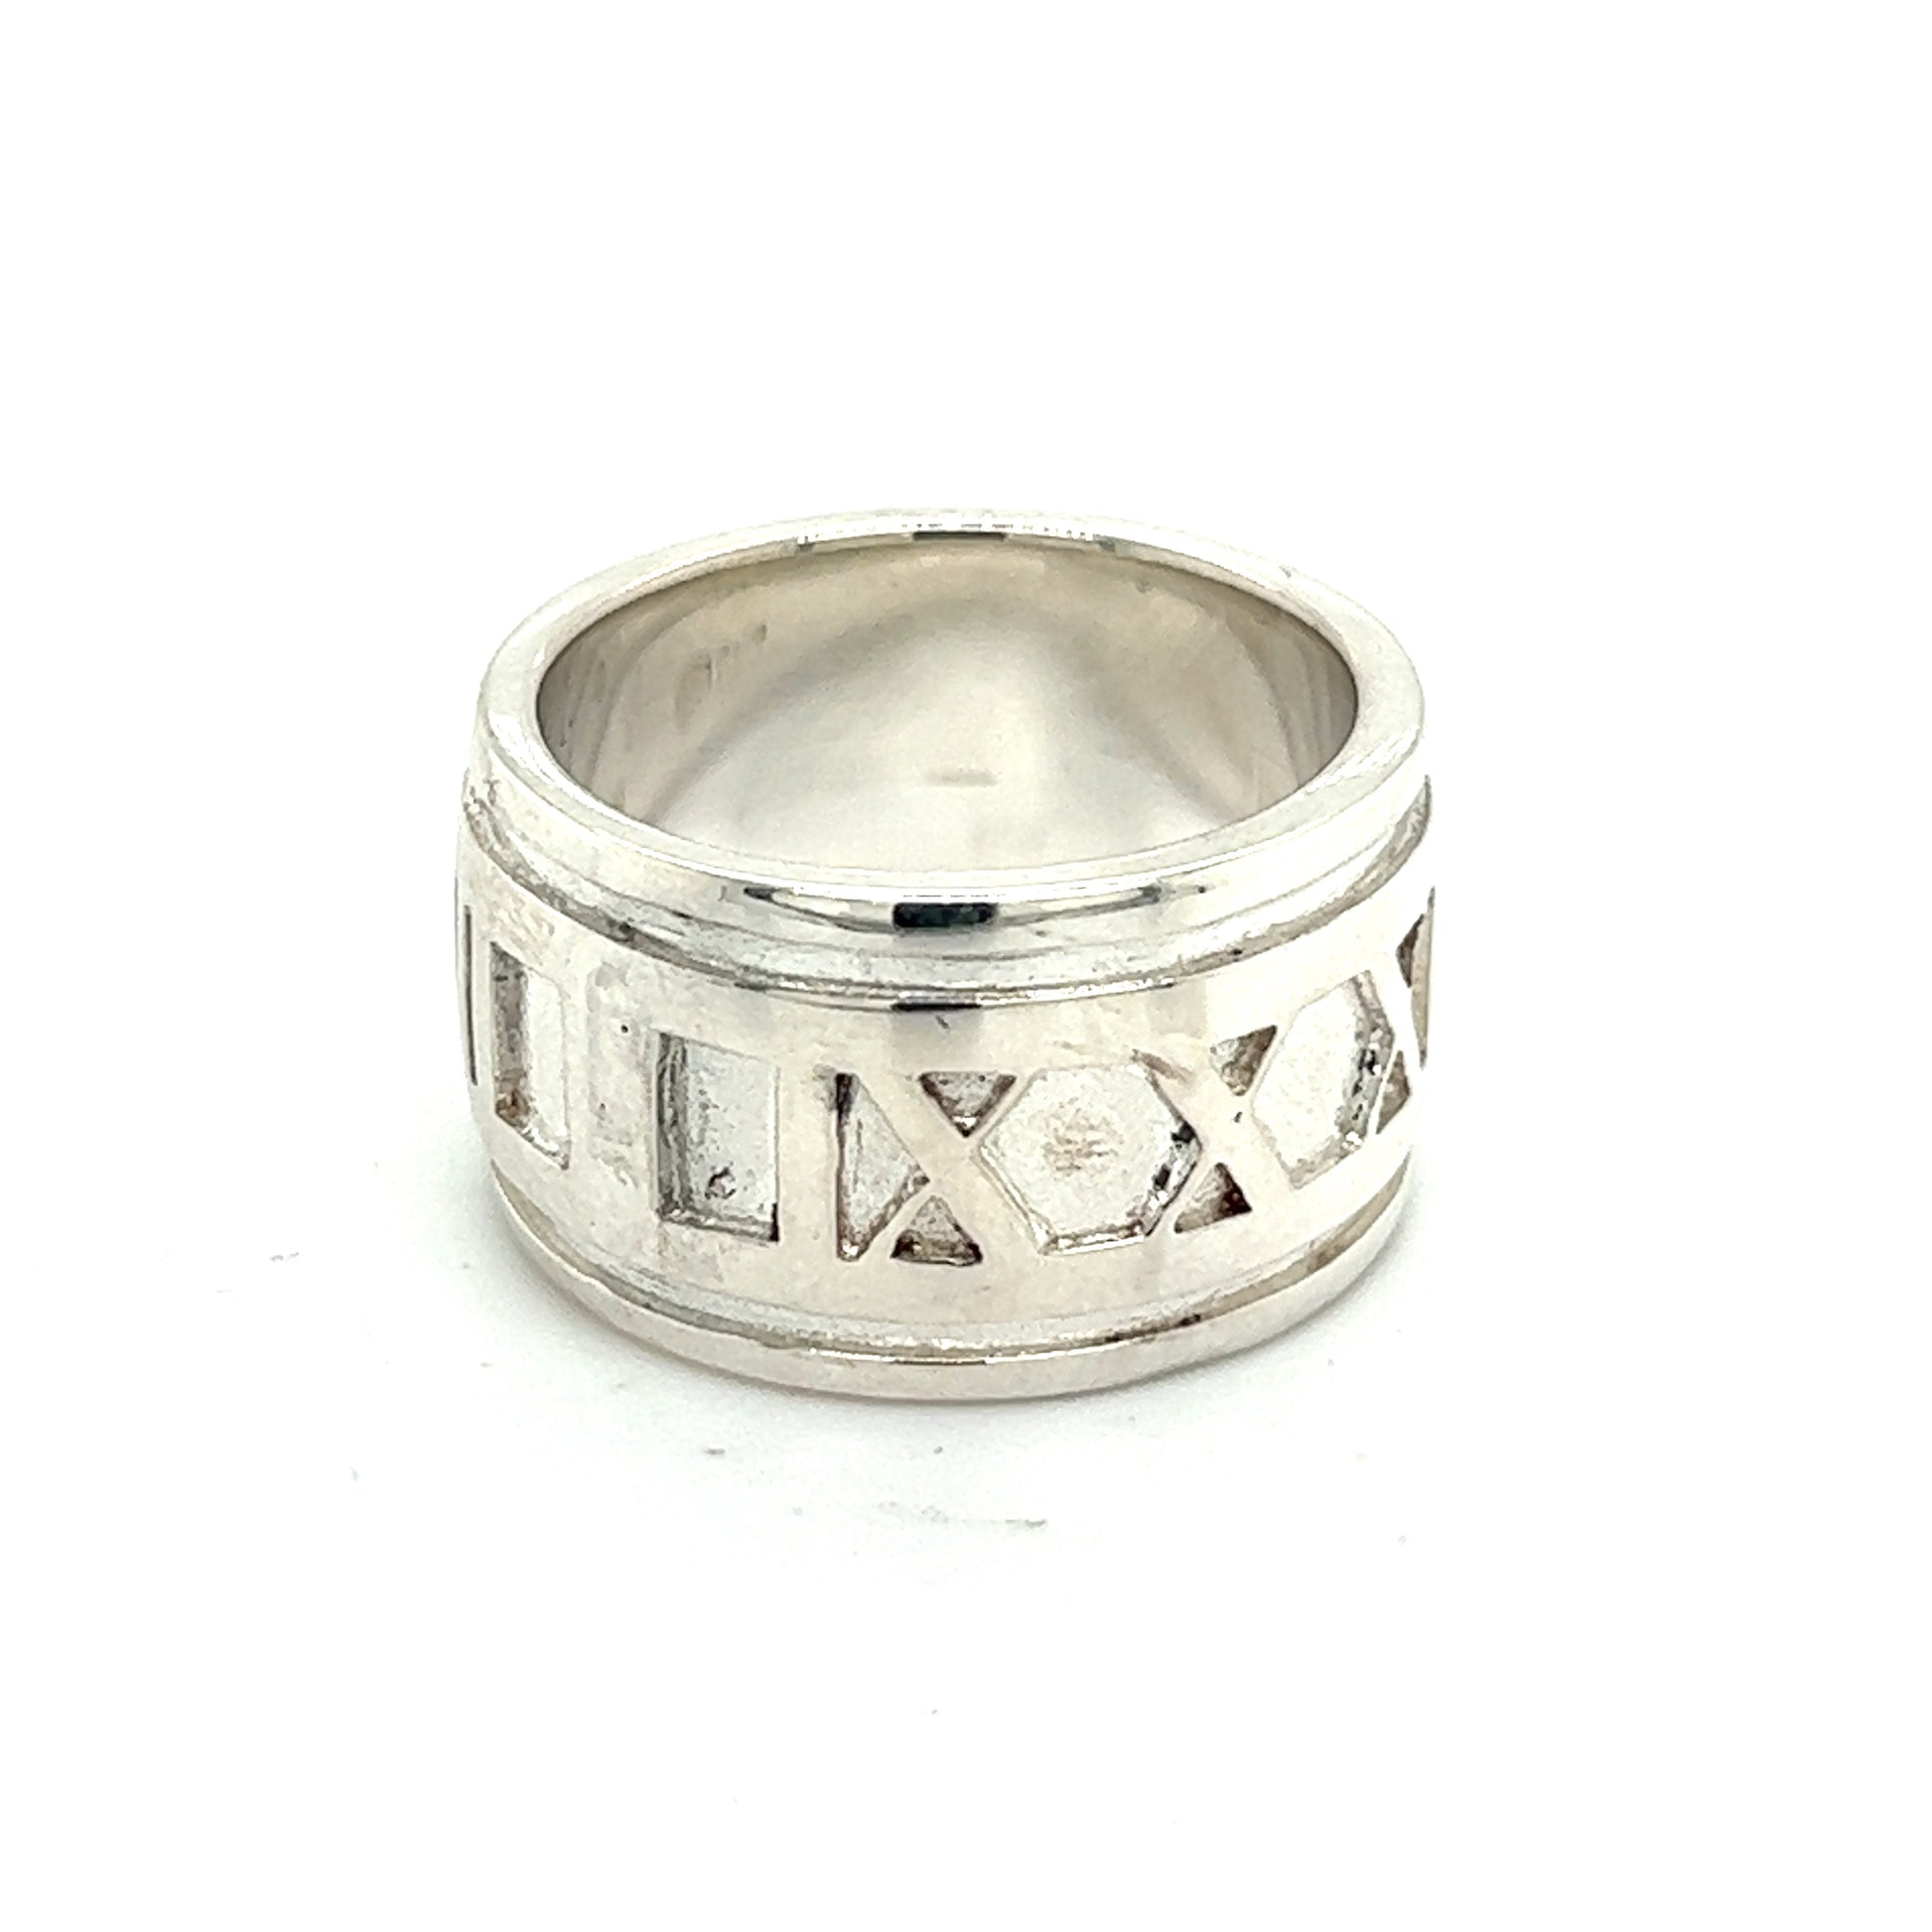 Tiffany & Co Authentic Estate Atlas Ring Size 5 Silver 11 mm TIF382 - Certified Fine Jewelry